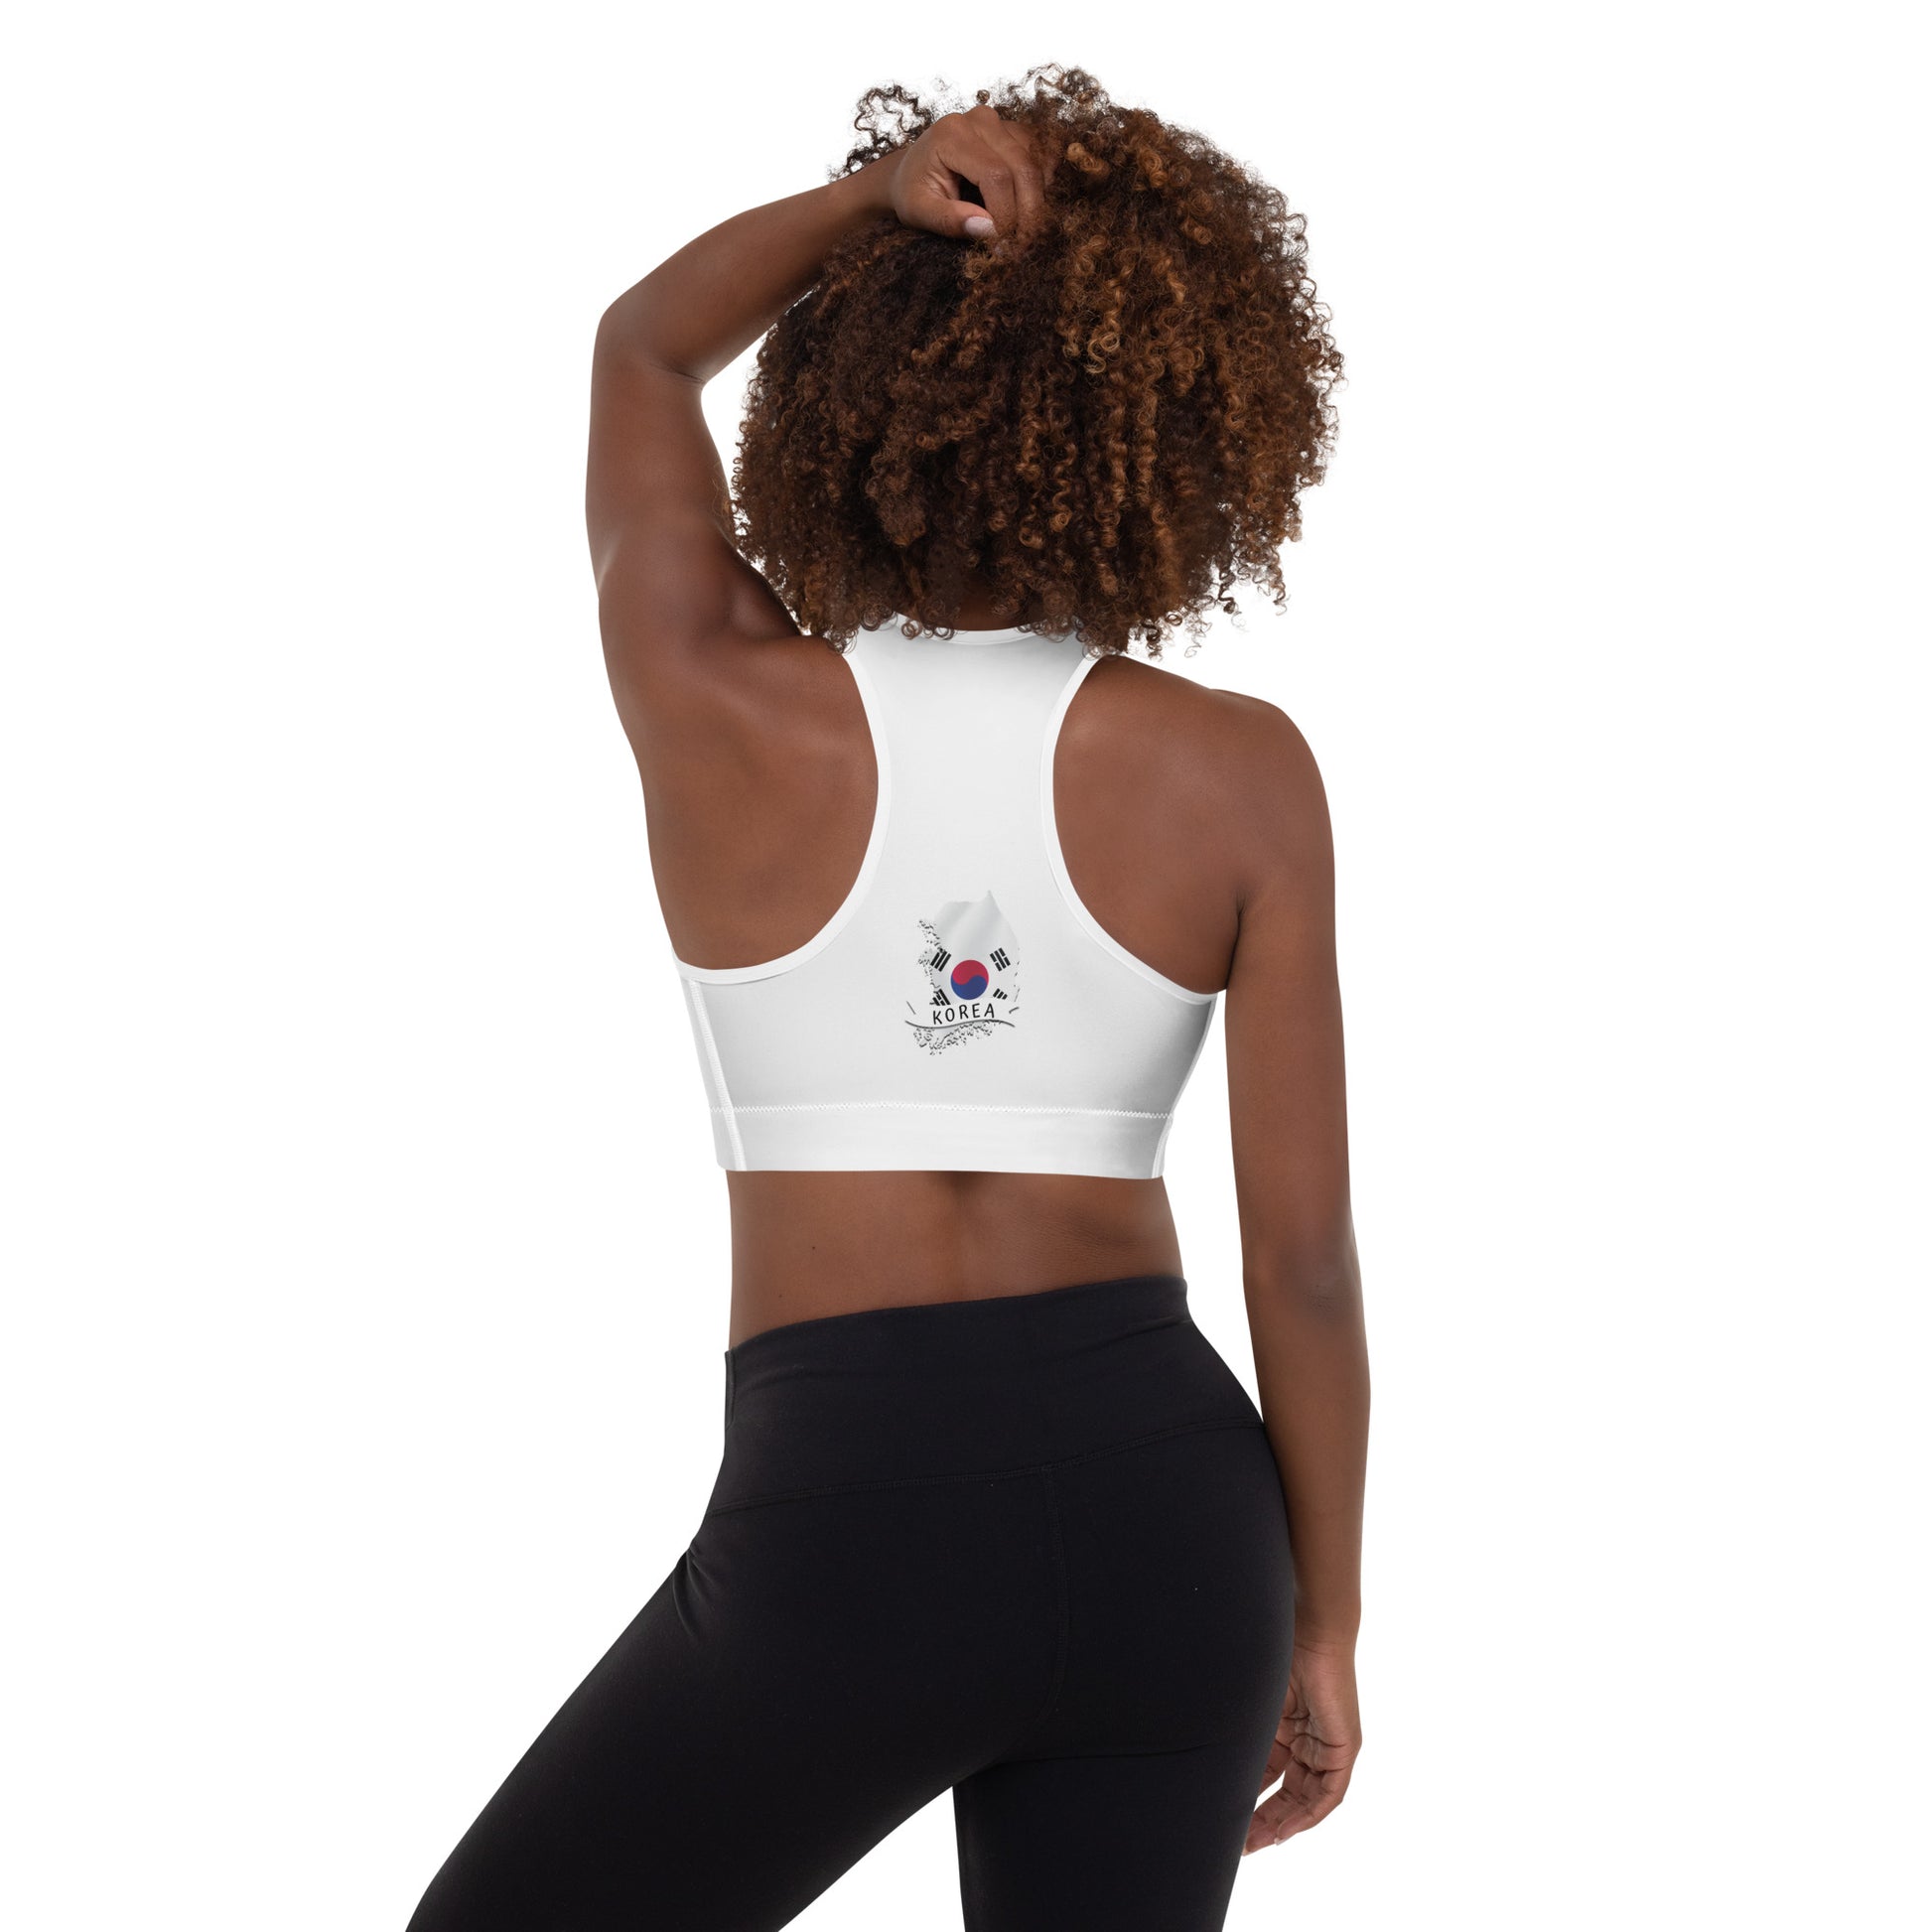 Breathable padded sports bra featuring a South Korean flag, ideal for workouts.